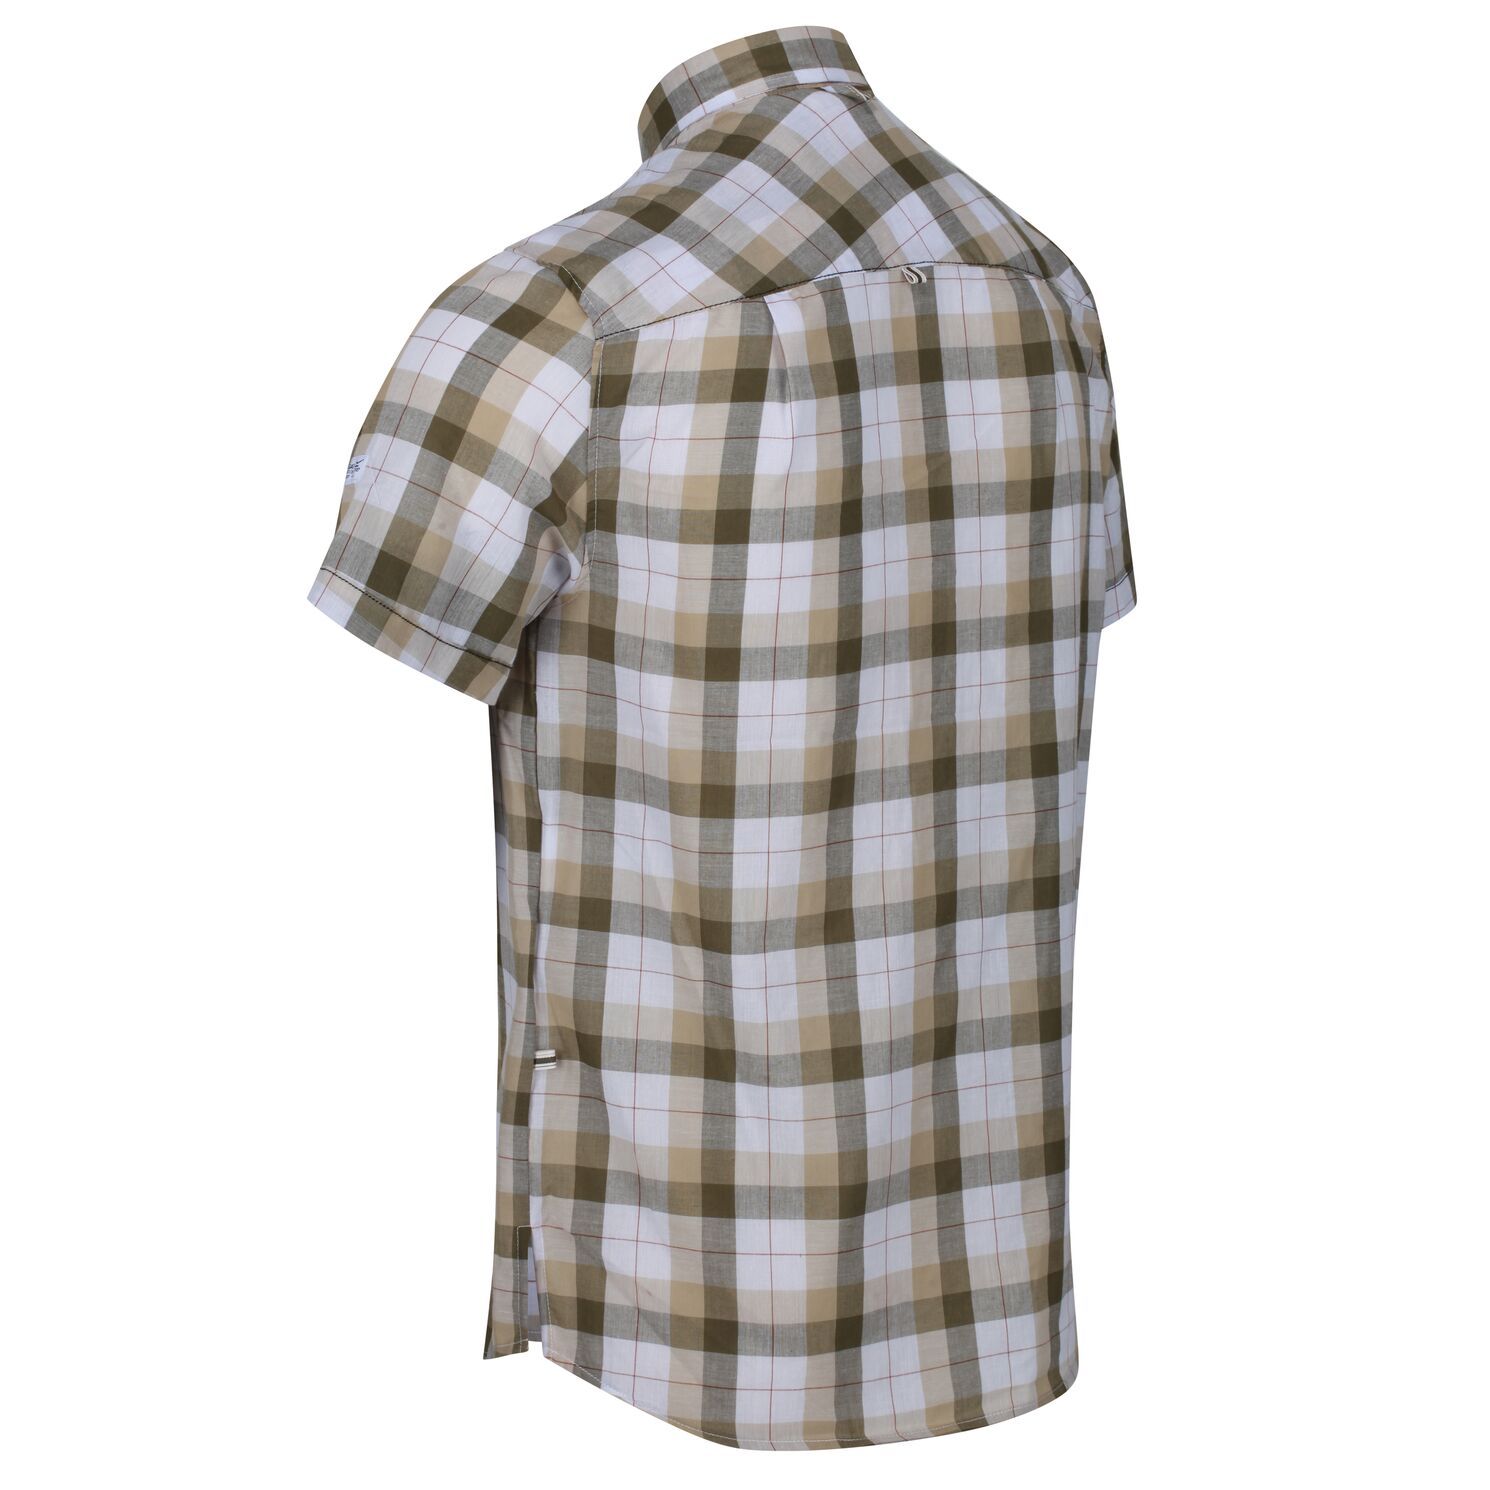 Material: 55% cotton, 45% polyester. Coolweave  organic cotton/polyester check fabric. Cut with a curved hem. Button fasten chest pocket. Environmentally friendly. Chest sizes to fit: (S): 94-96.5cm, (M): 99-101.5cm, (L): 104-106.5cm, (XL): 109-112cm, (XXL): 117-122cm, (3XL): 124.5-129.5cm.